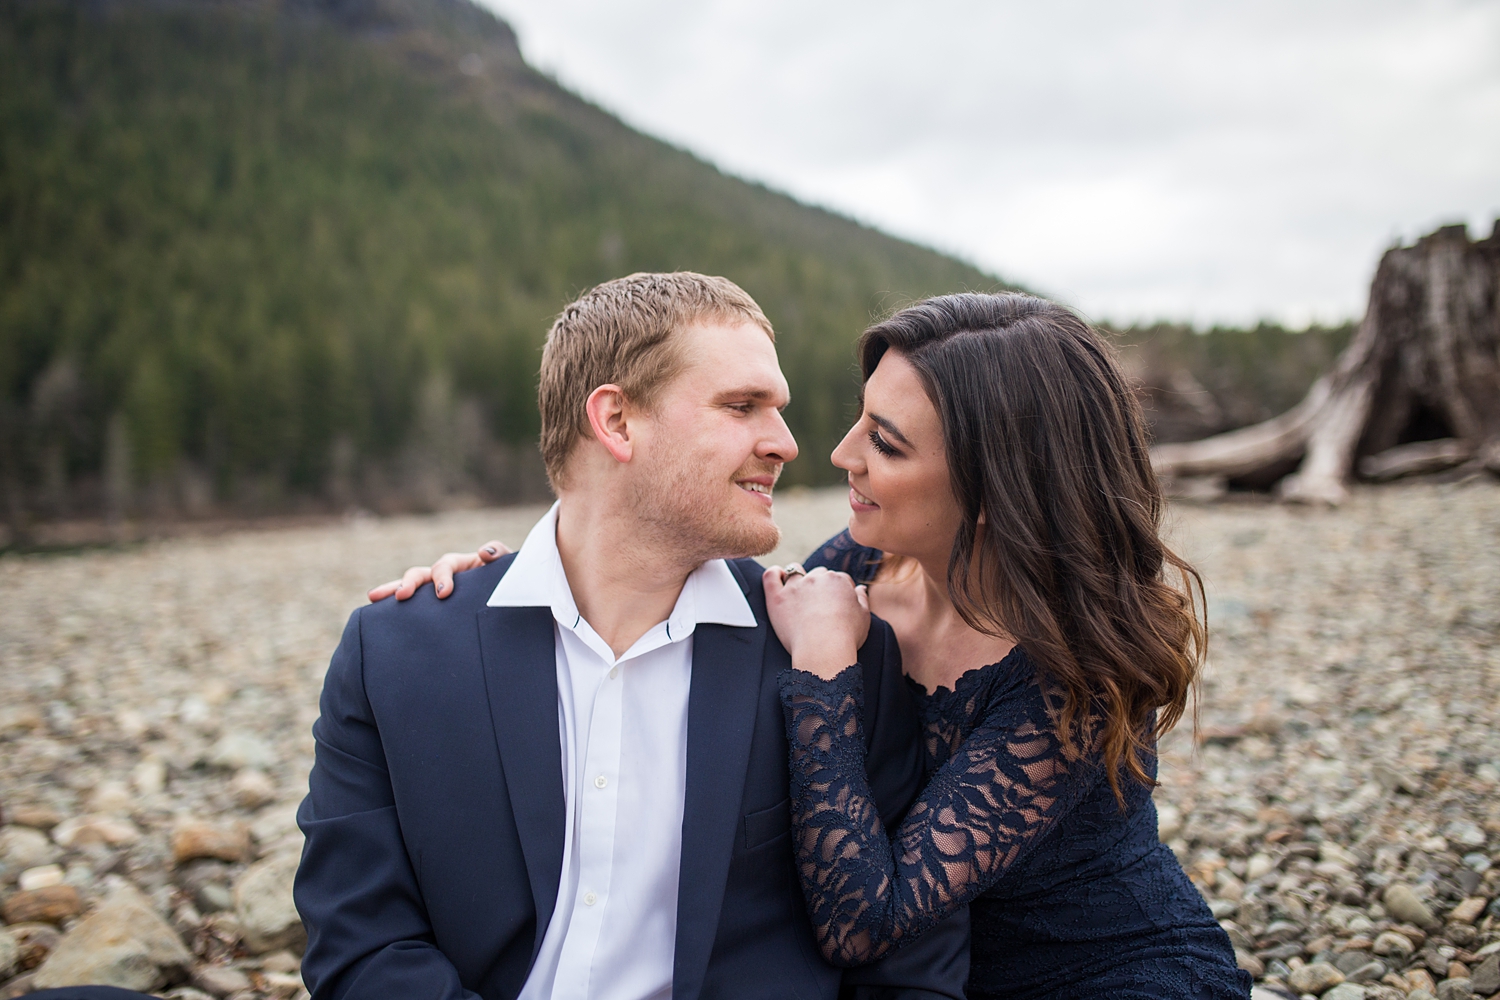 Style tips for amazing engagement pictures: professional hair and makeup.